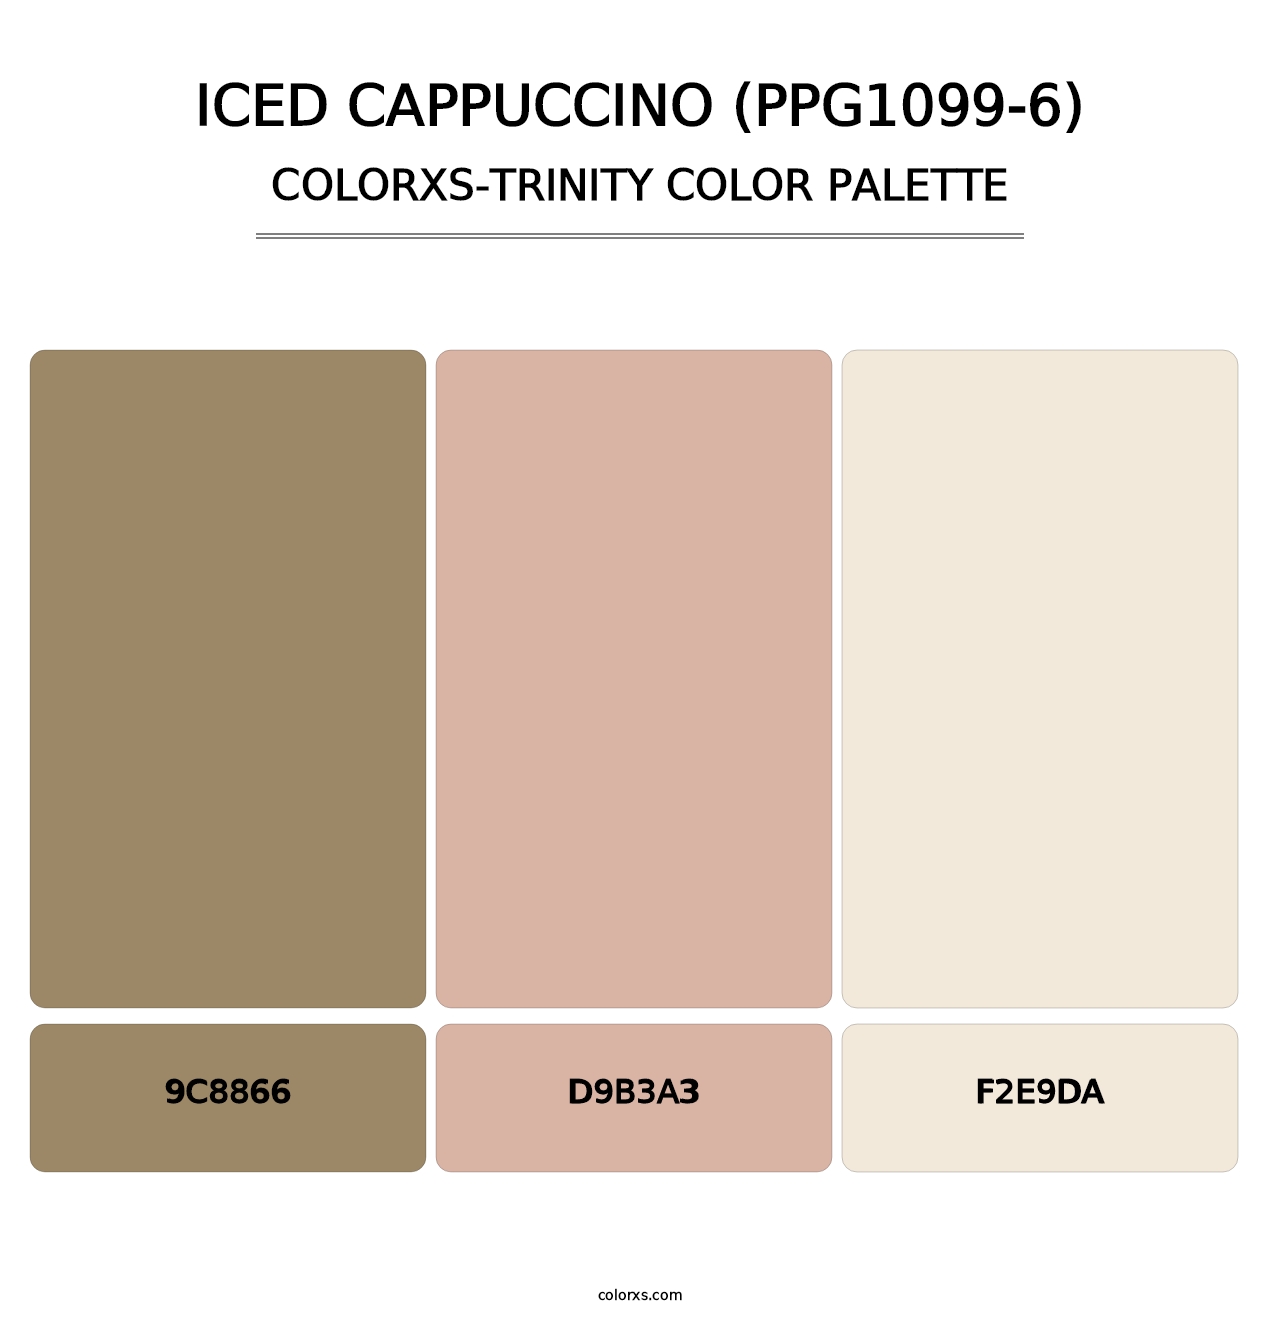 Iced Cappuccino (PPG1099-6) - Colorxs Trinity Palette